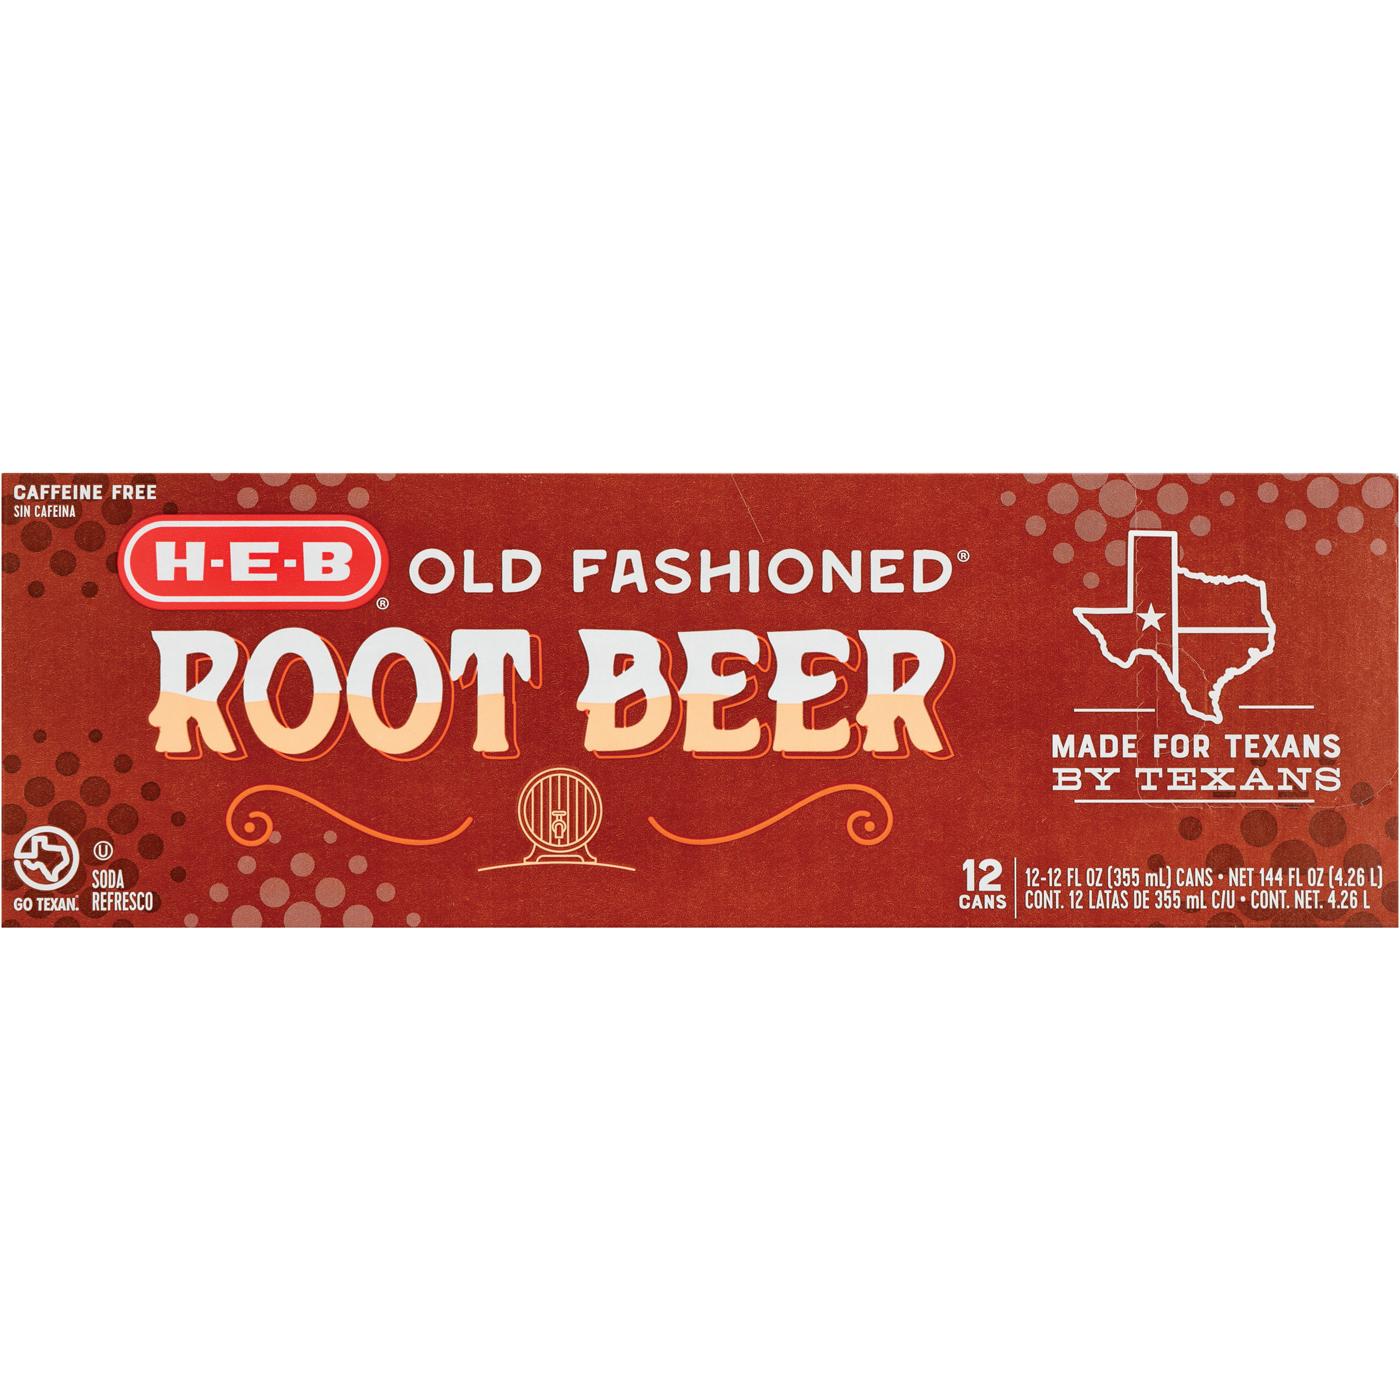 H-E-B Old Fashioned Root Beer Soda 12 pk Cans; image 1 of 2